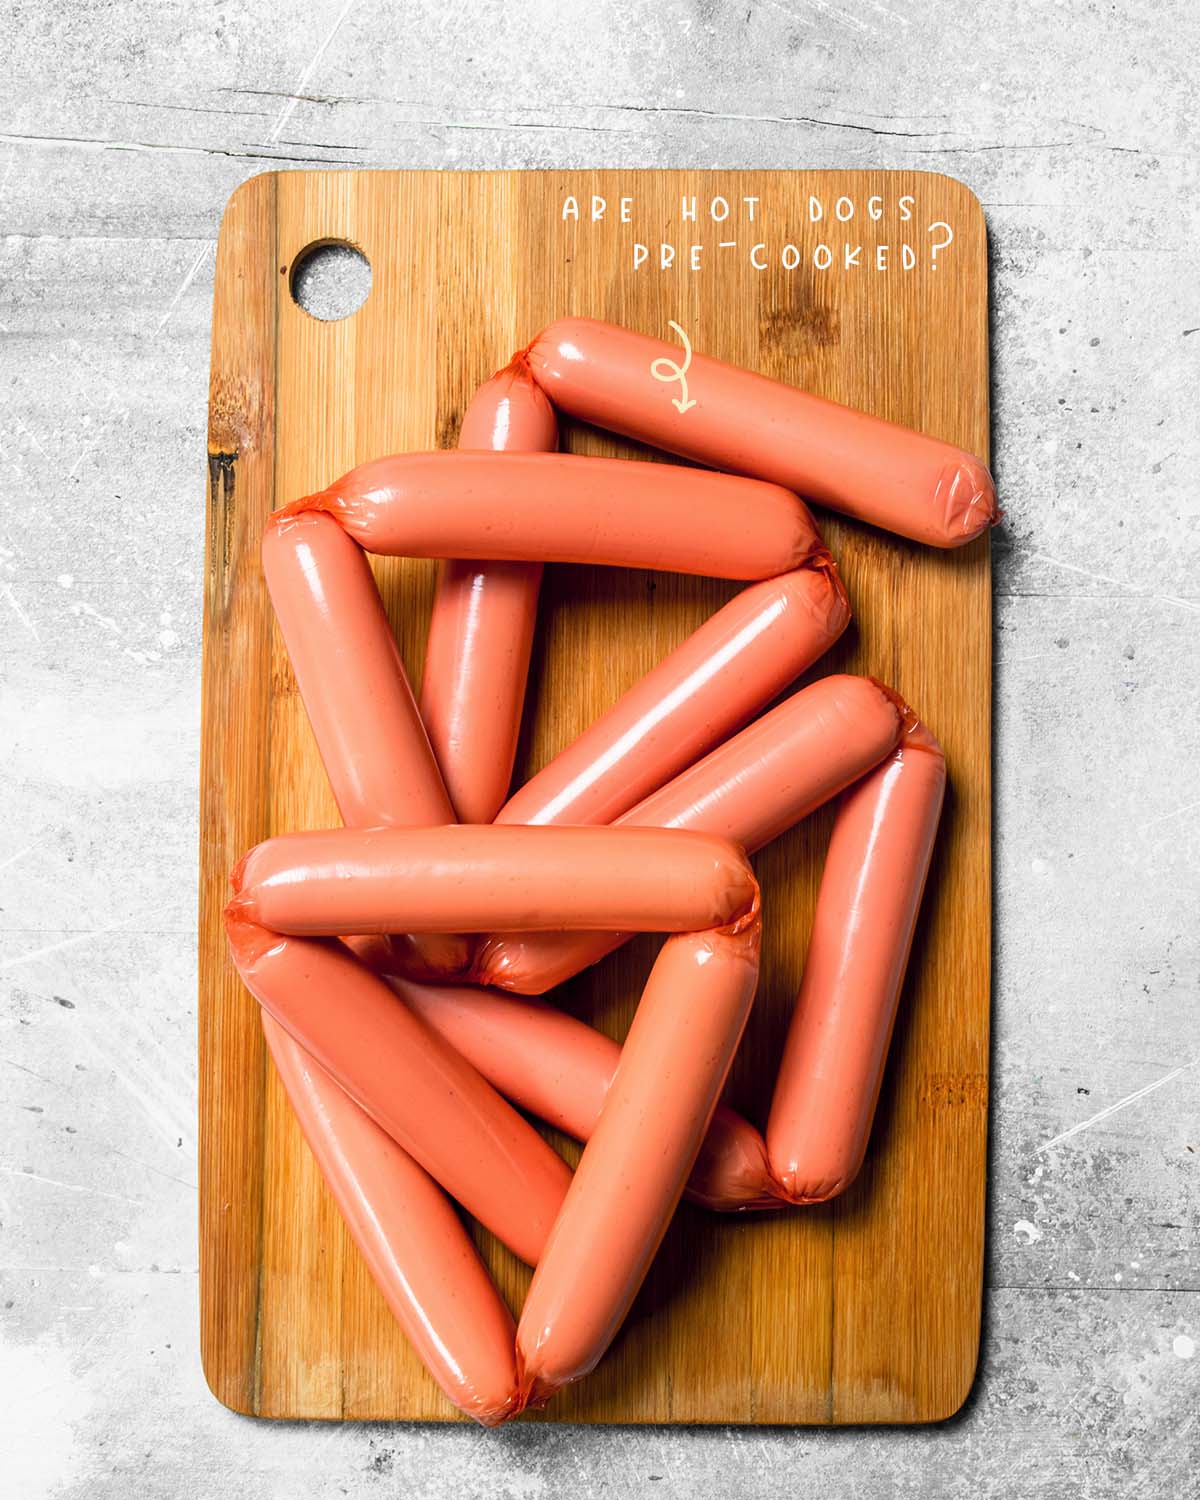 Hotdogs are already cooked before they are packaged and sold. In fact, the U.S. Department of Agriculture requires that hotdogs be cooked to an internal temperature of 155° Fahrenheit before selling them to consumers. 